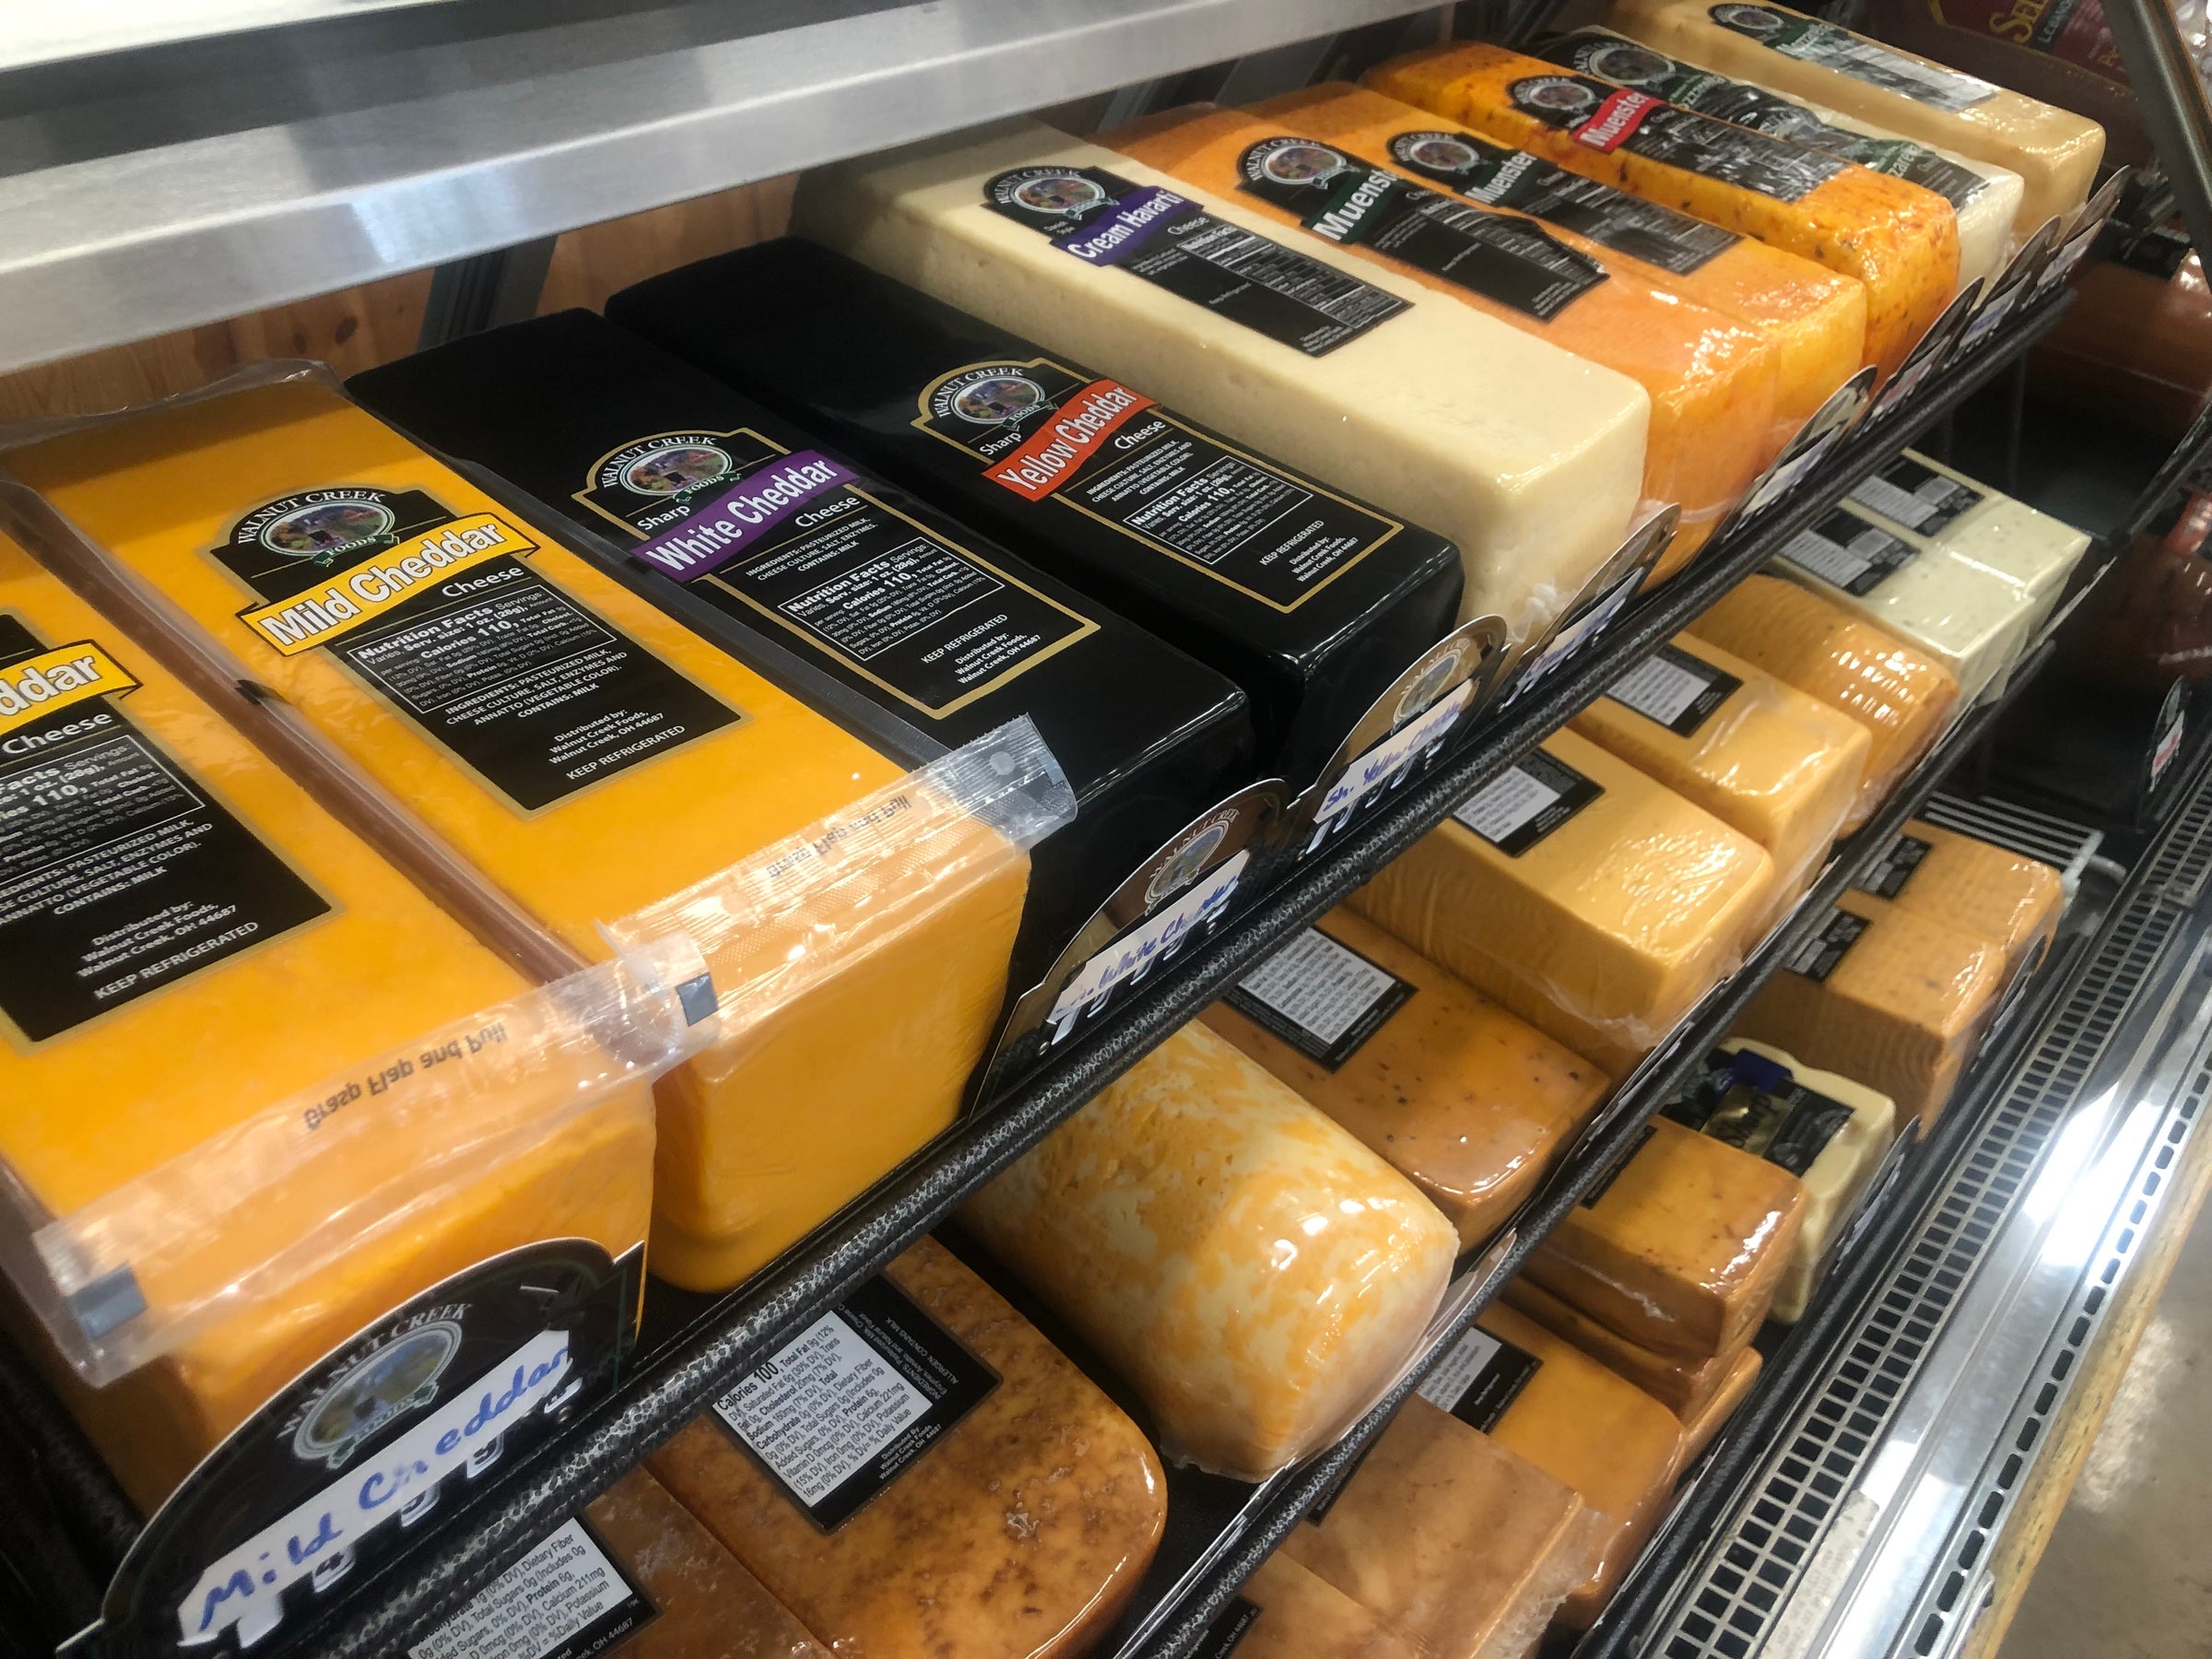 Explore the Amish Cheese House in Chouteau, Oklahoma